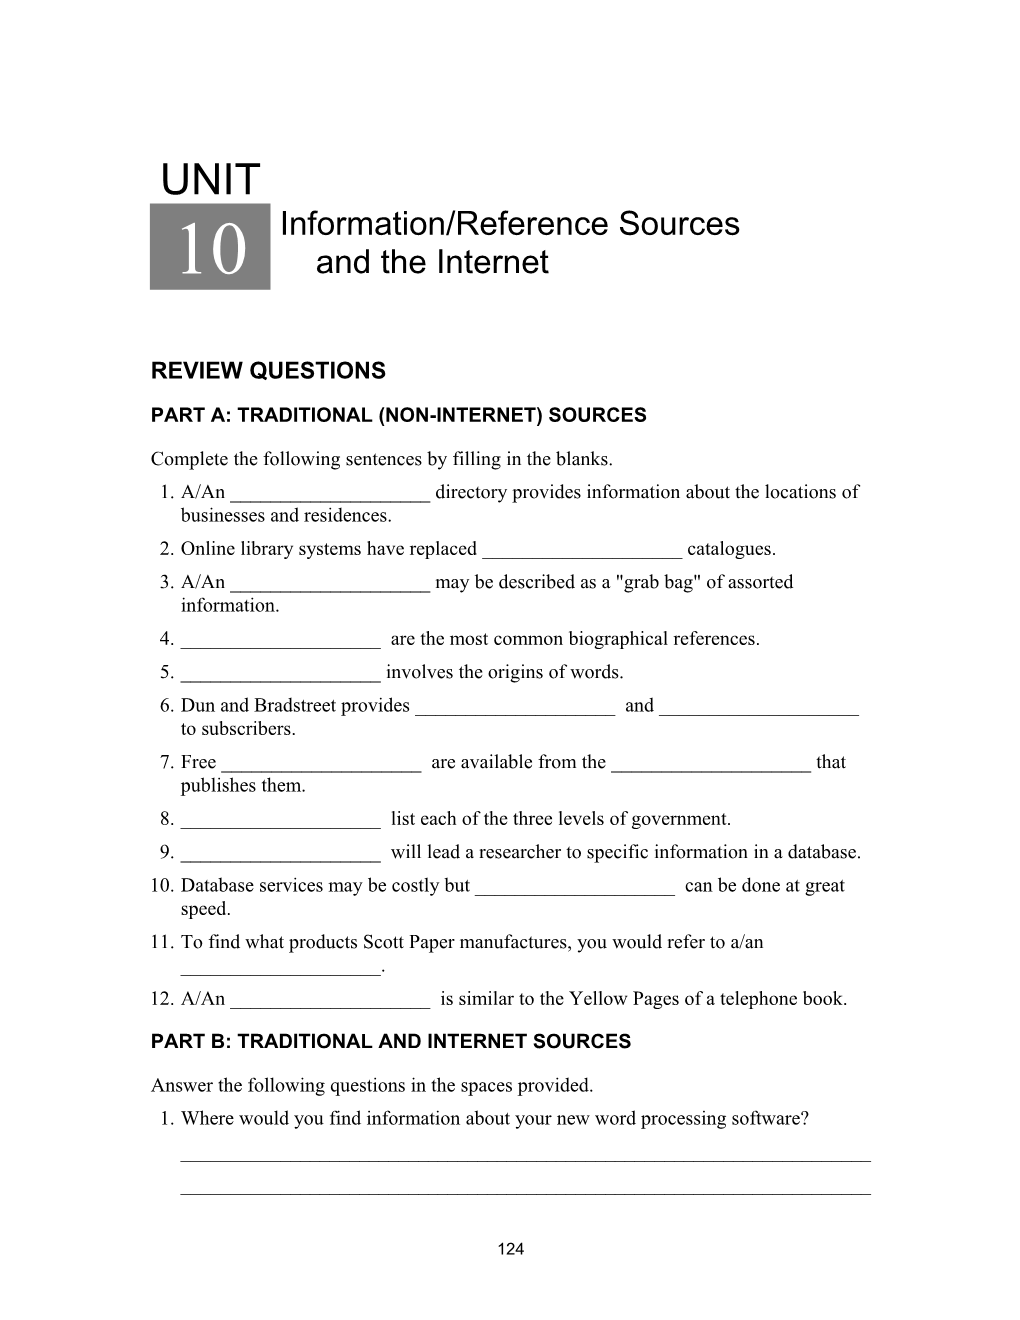 Information/Reference Sources and the Internet